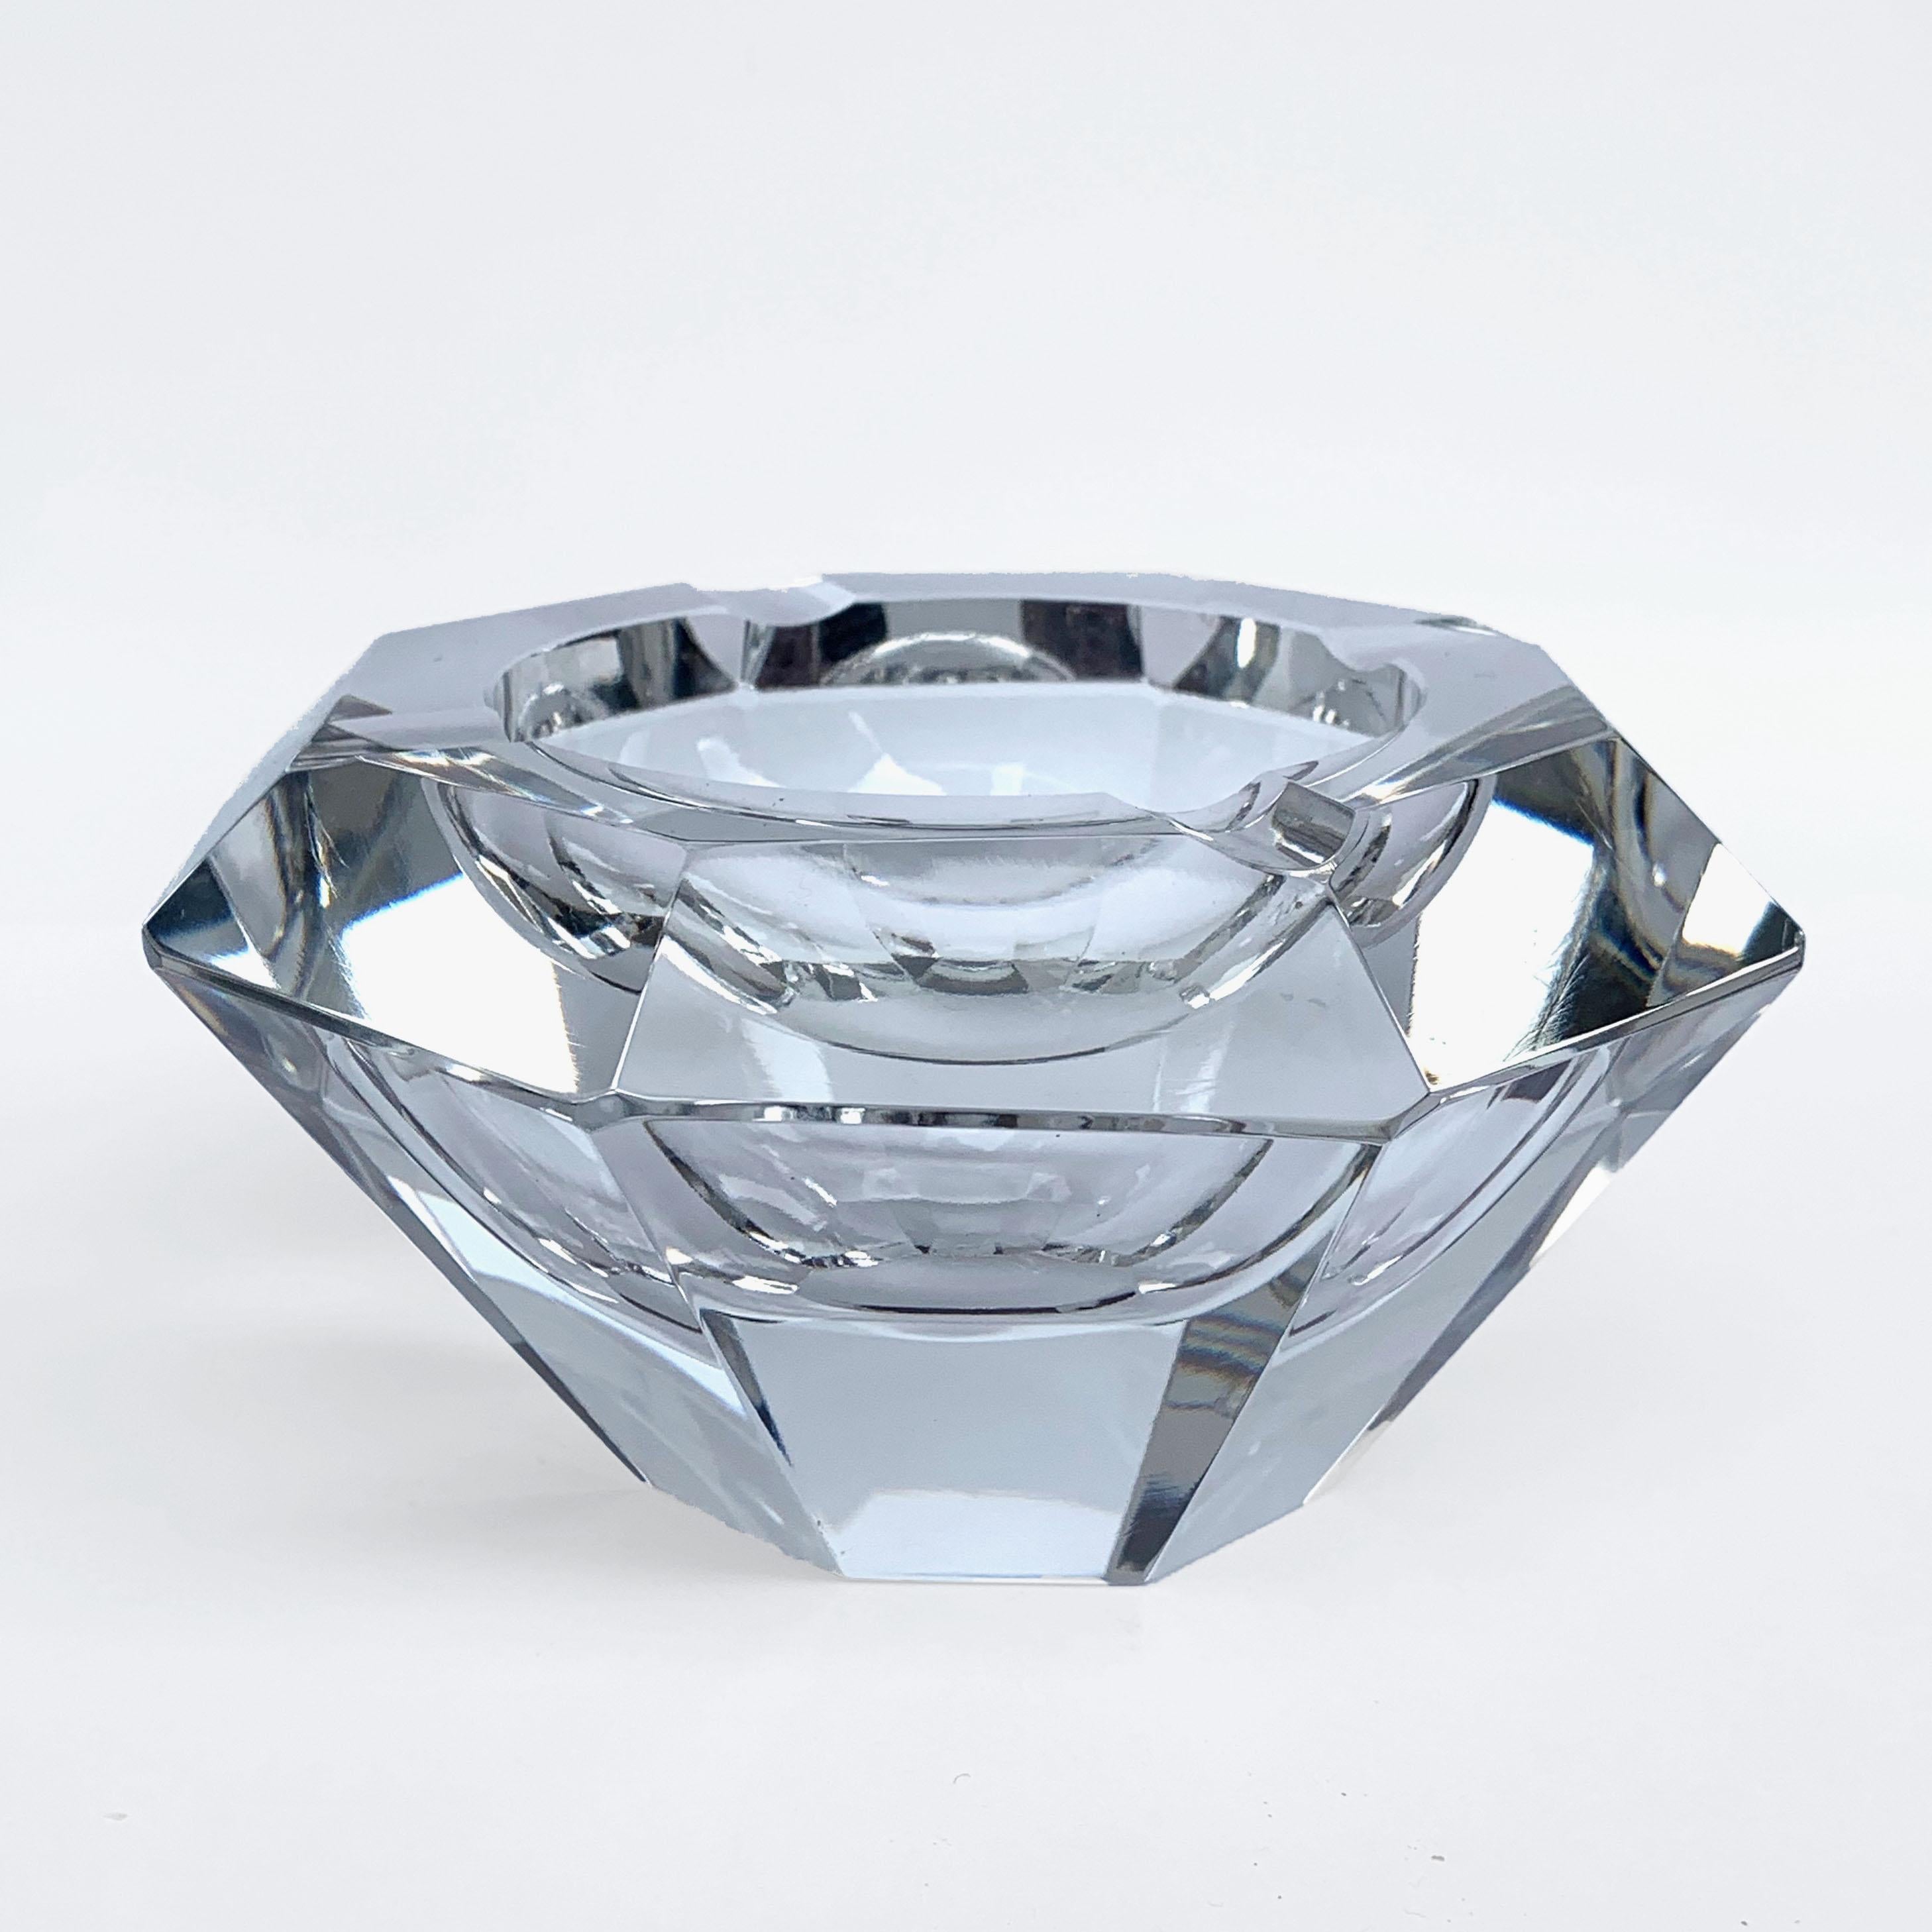 20th Century Giant Flavio Poli Bowl in Faceted Murano Glass in the Shape of a Diamond, Italy For Sale